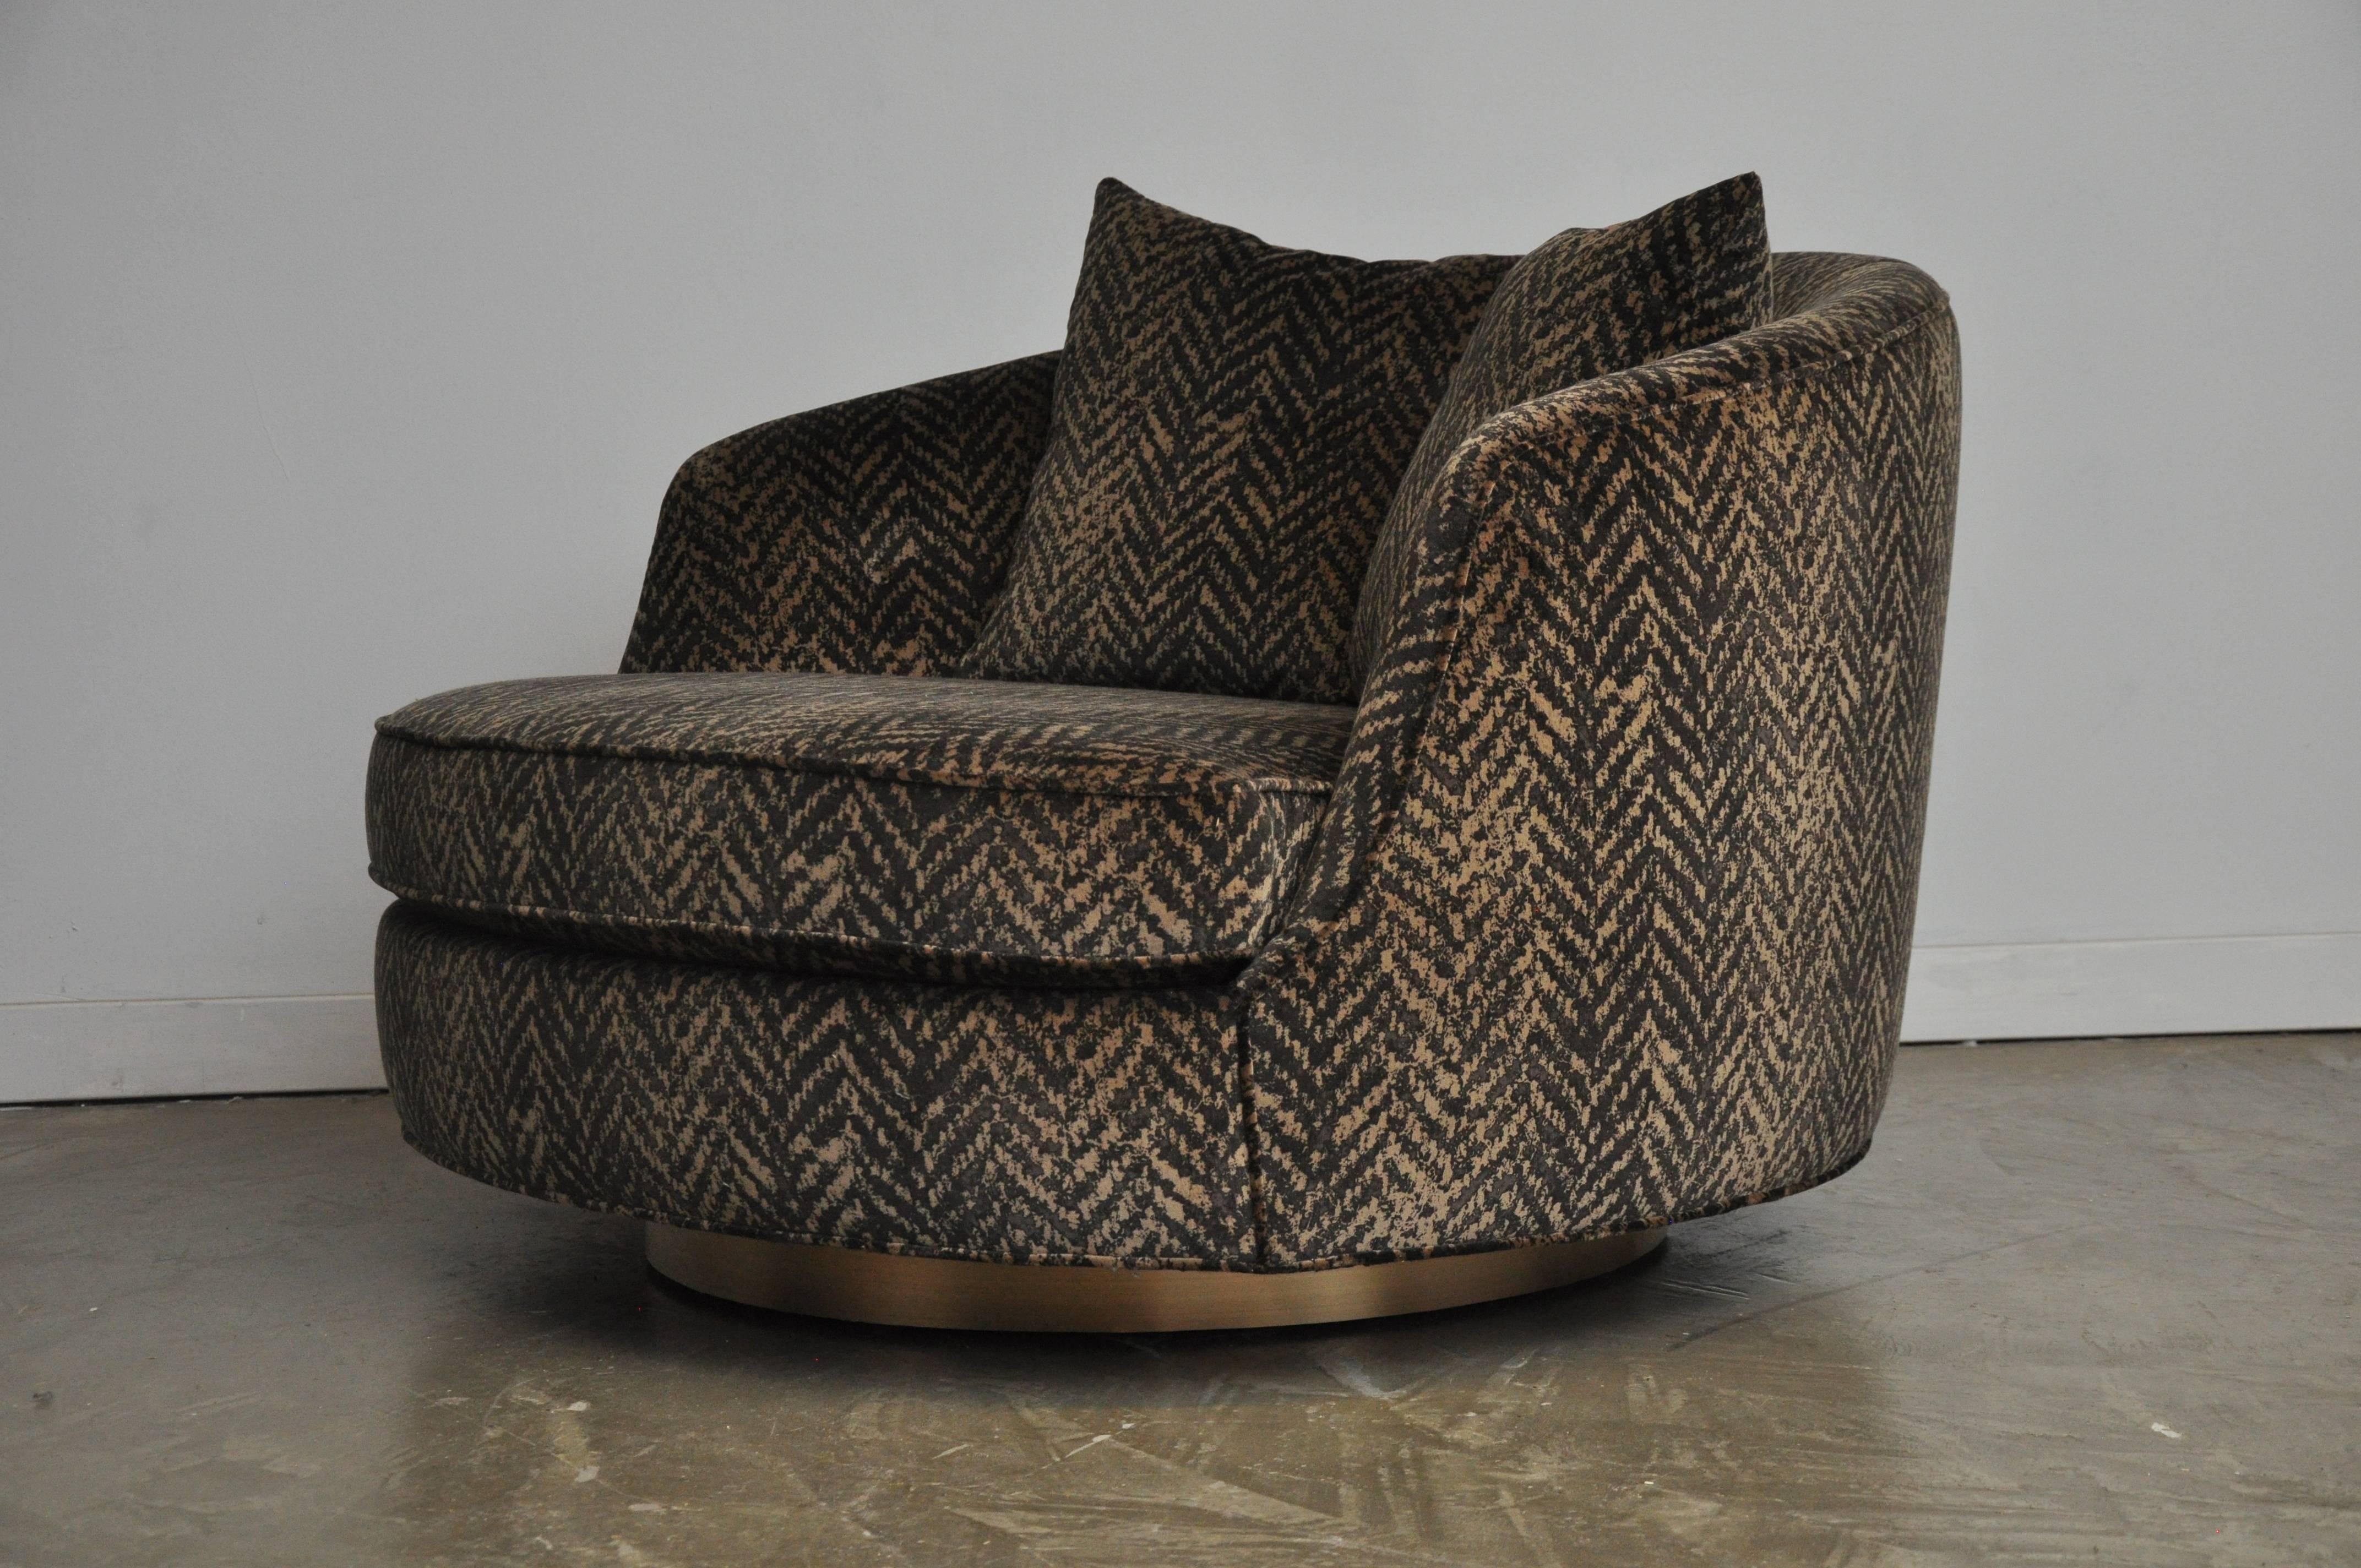 Large cuddle chair by Milo Baughman. Fully restored and reupholstered. Black and gold printed velvet upholstery on bronze swivel base.